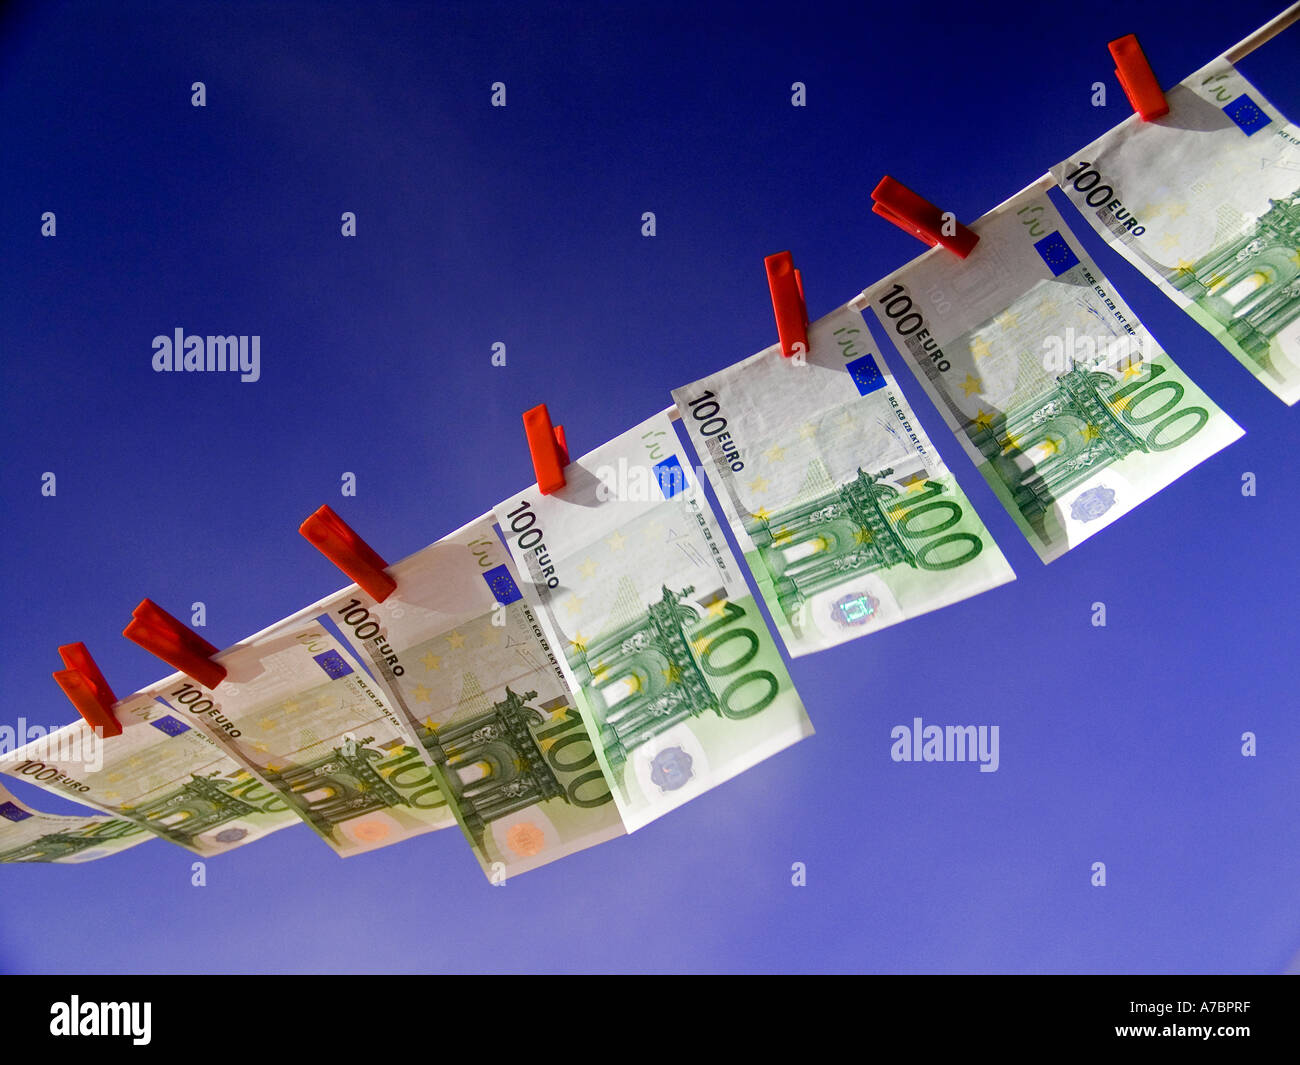 EUROS NOTES 100’s CONCEPT BLUE SKY Crisp new Euro notes pegged flying high in a line against a sunny blue sky Stock Photo